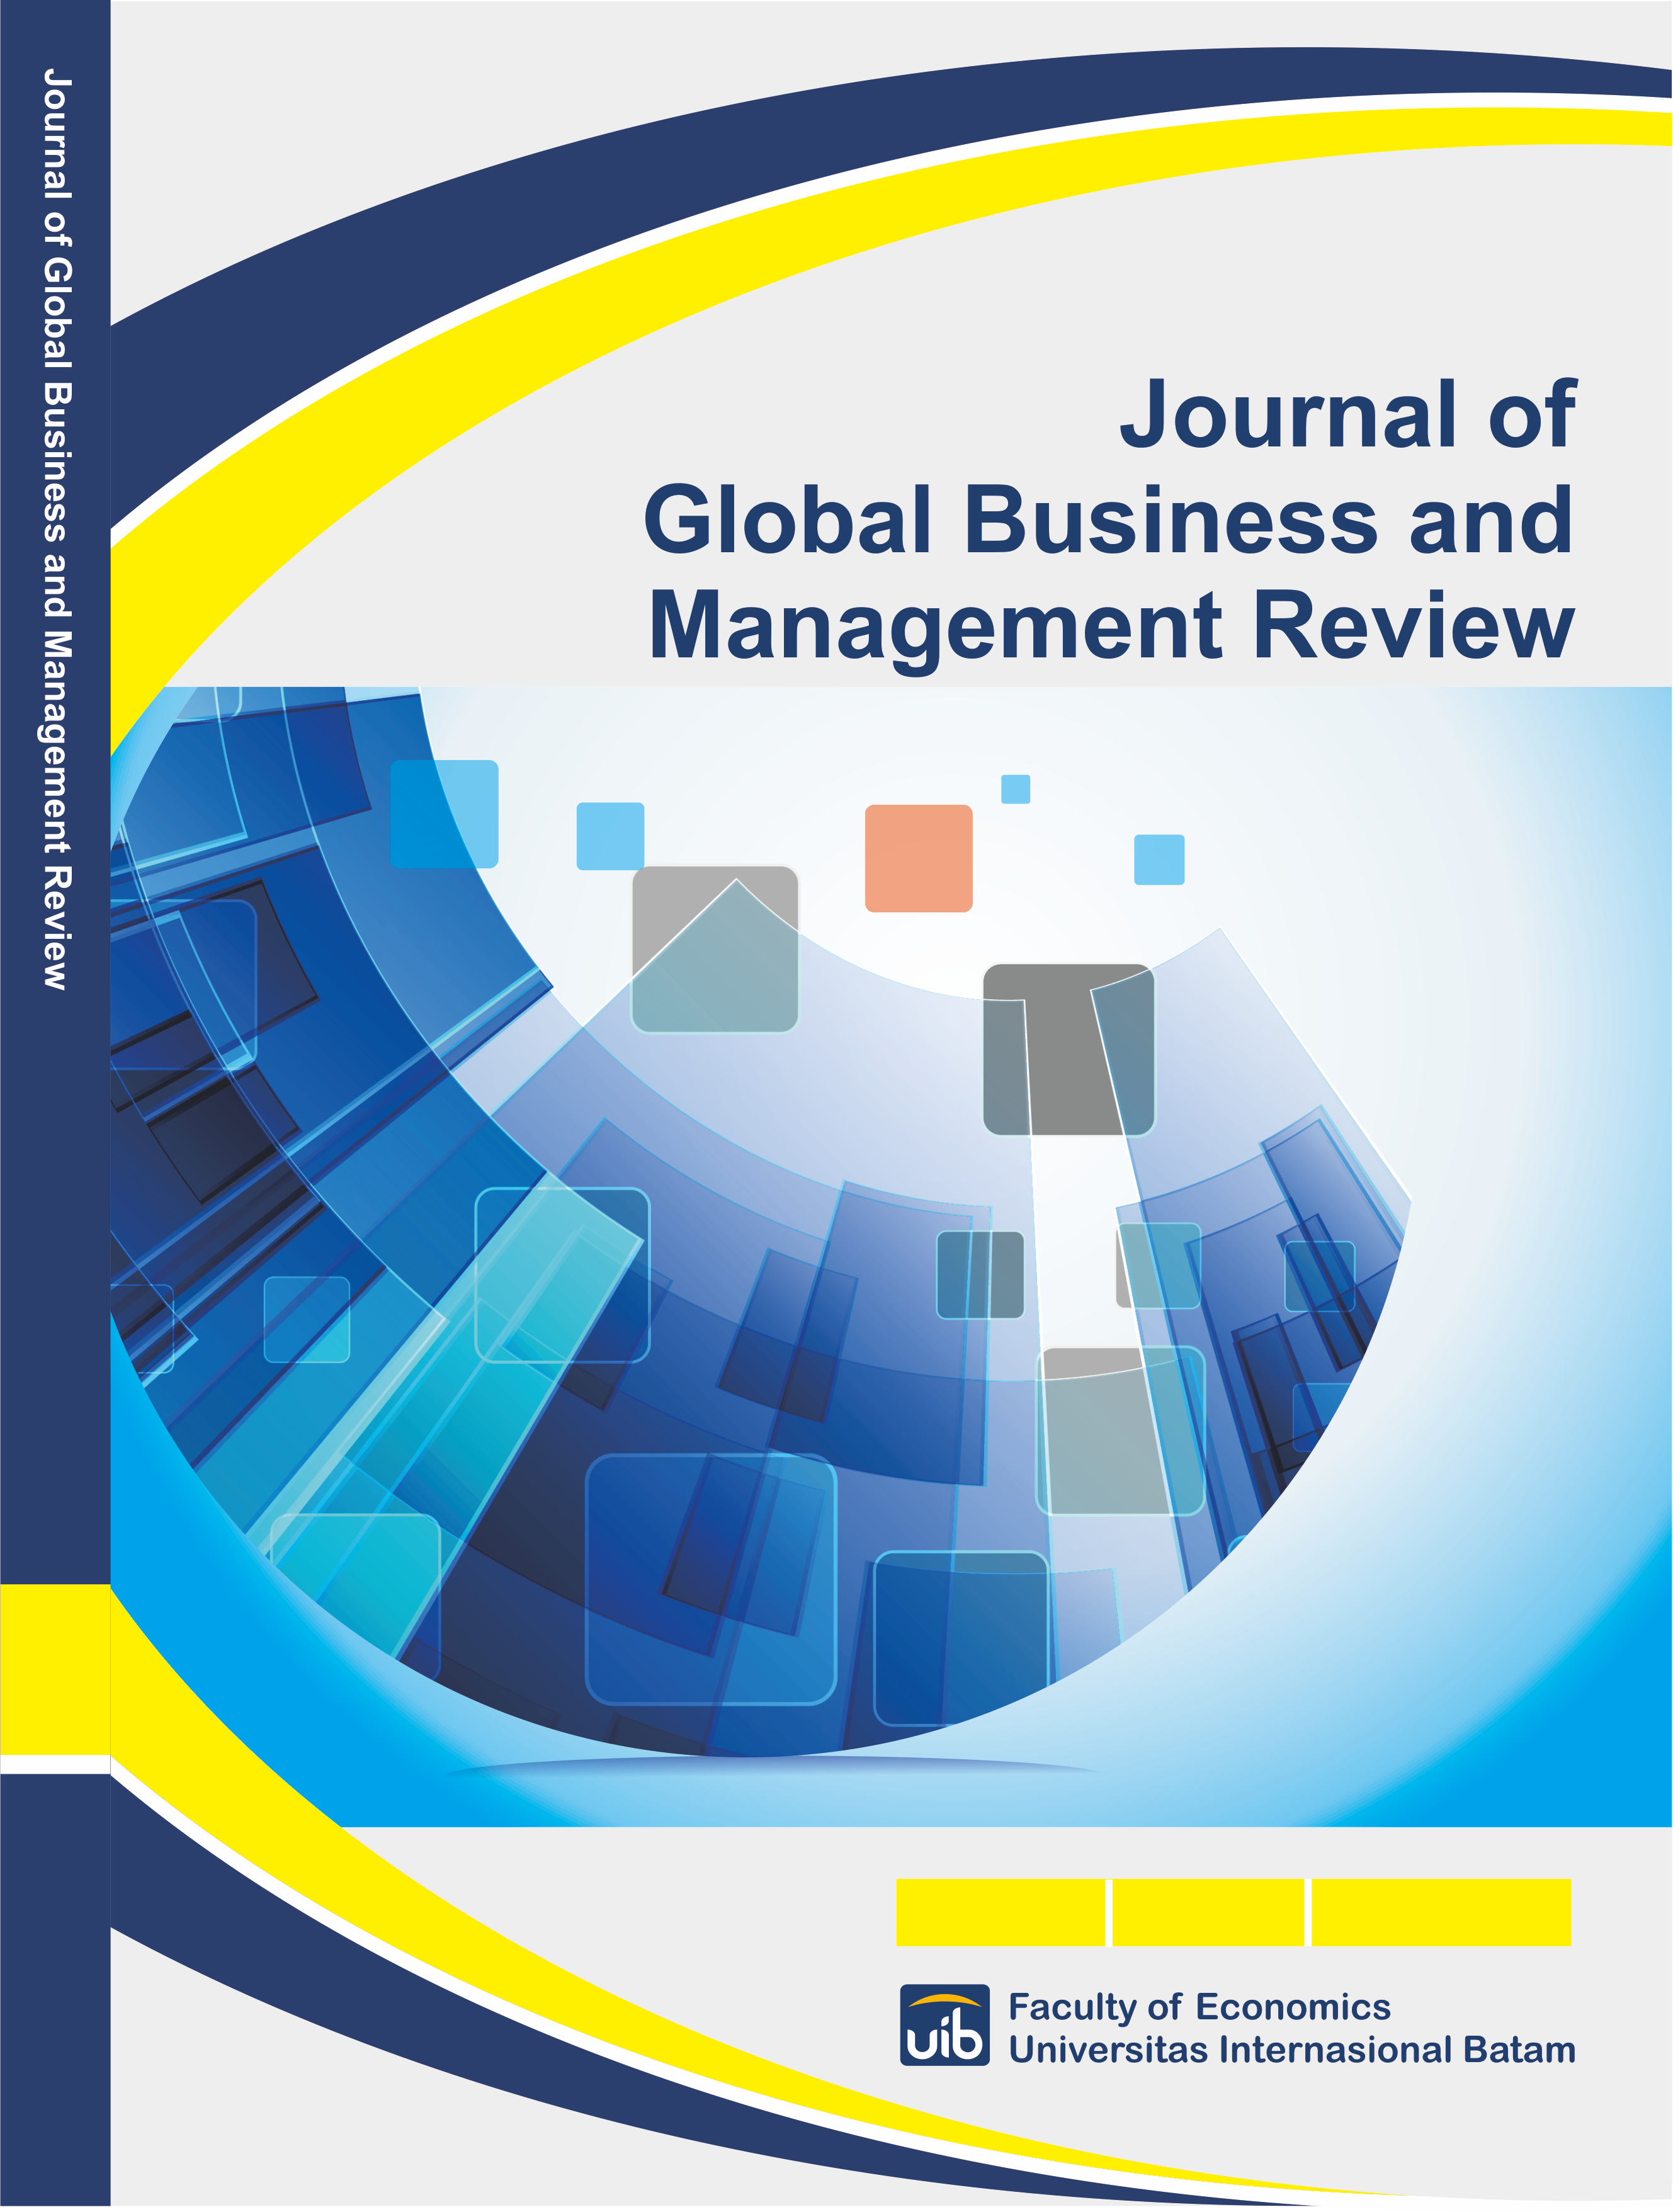 					View Vol. 1 No. 1 (2019): Journal of Global Business and Management Review
				